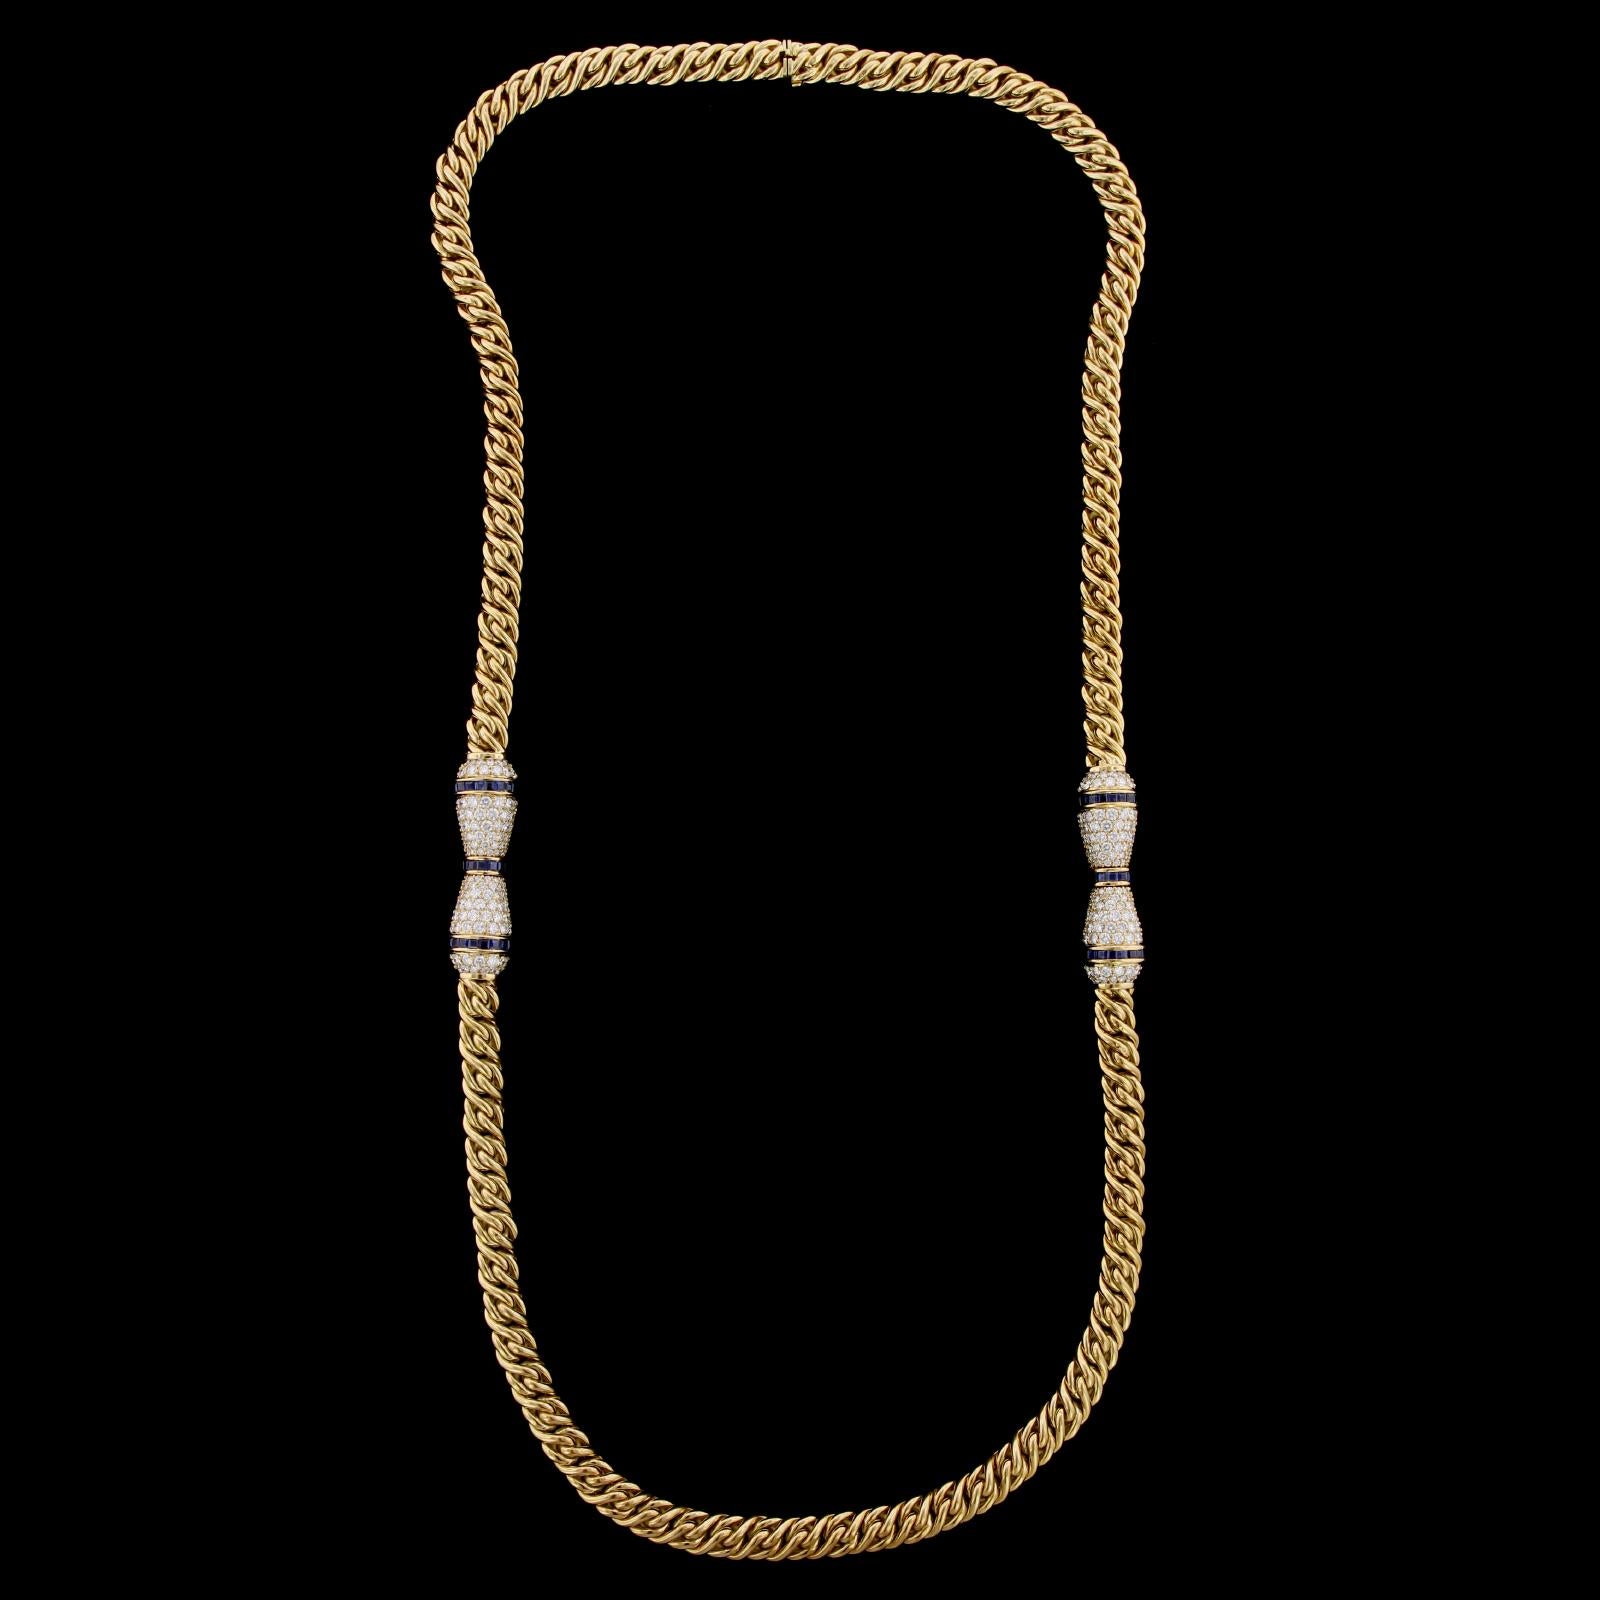 Hammerman Brothers 18K Yellow Gold Sapphire and Diamond Necklace. The necklace is designed with two stations pave set with 304 full cut diamonds, approx. total wt. 10.00cts., FG color, VS1 clarity, and 74 square cut sapphires, approx. total wt.